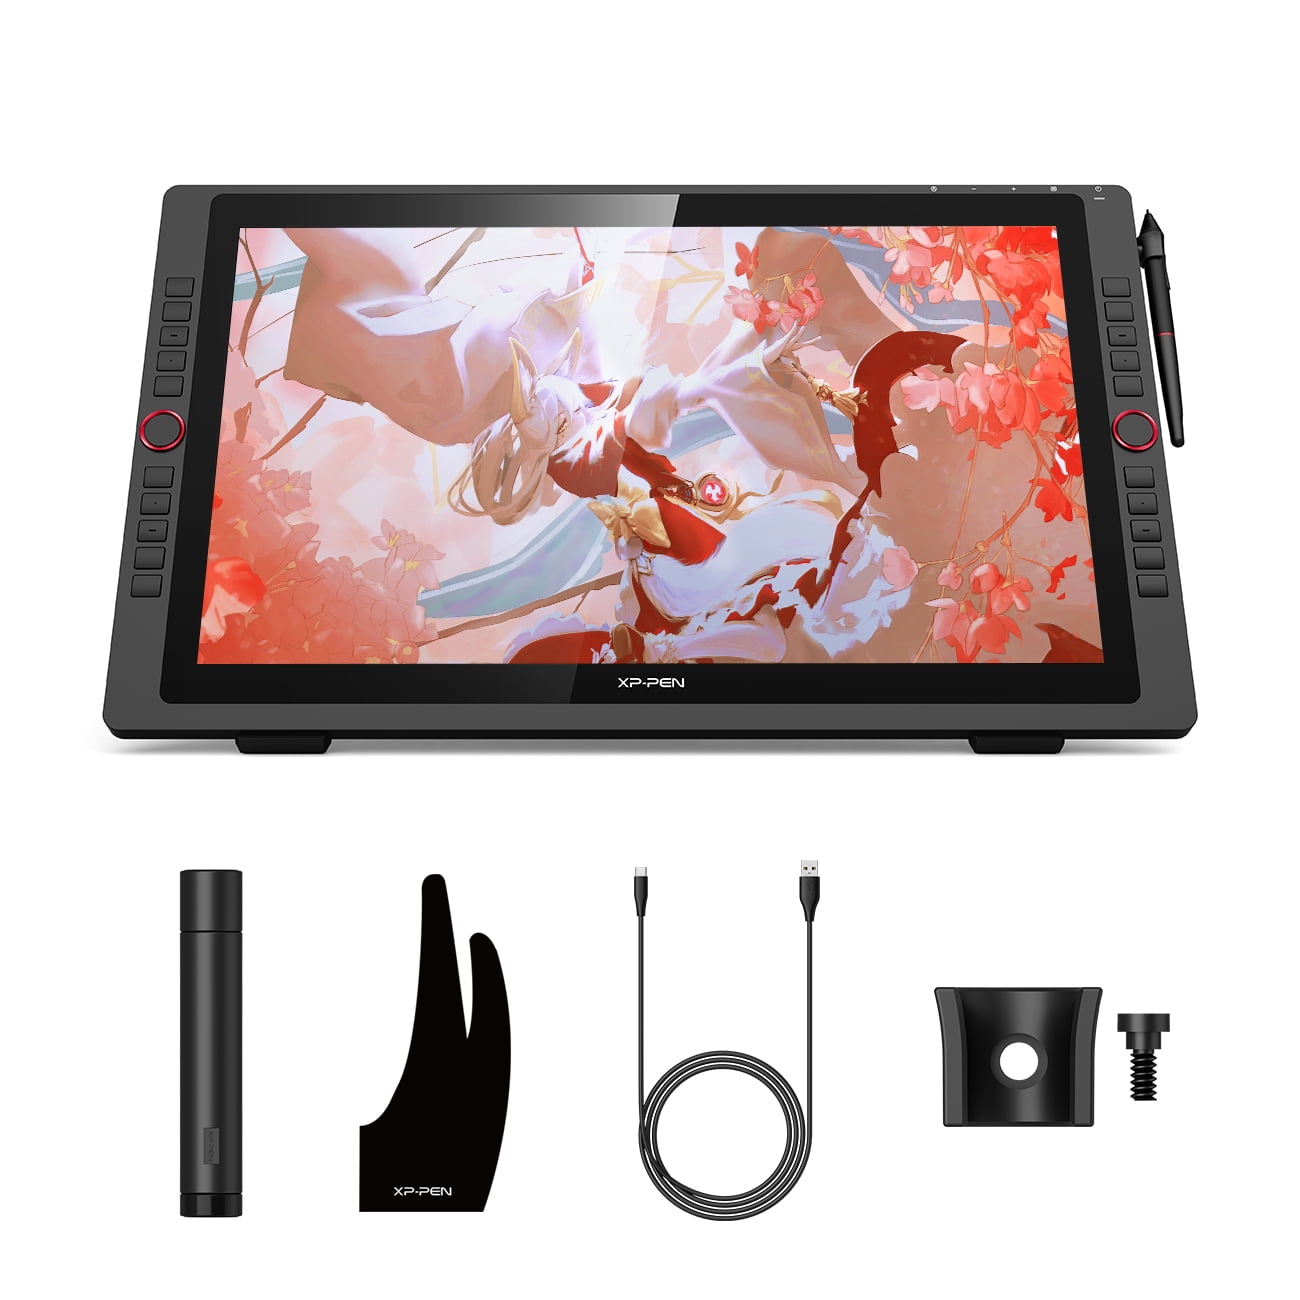 XP-Pen Artist 13.3 Pro Graphic Drawing Tablet with Screen 8192 Pen